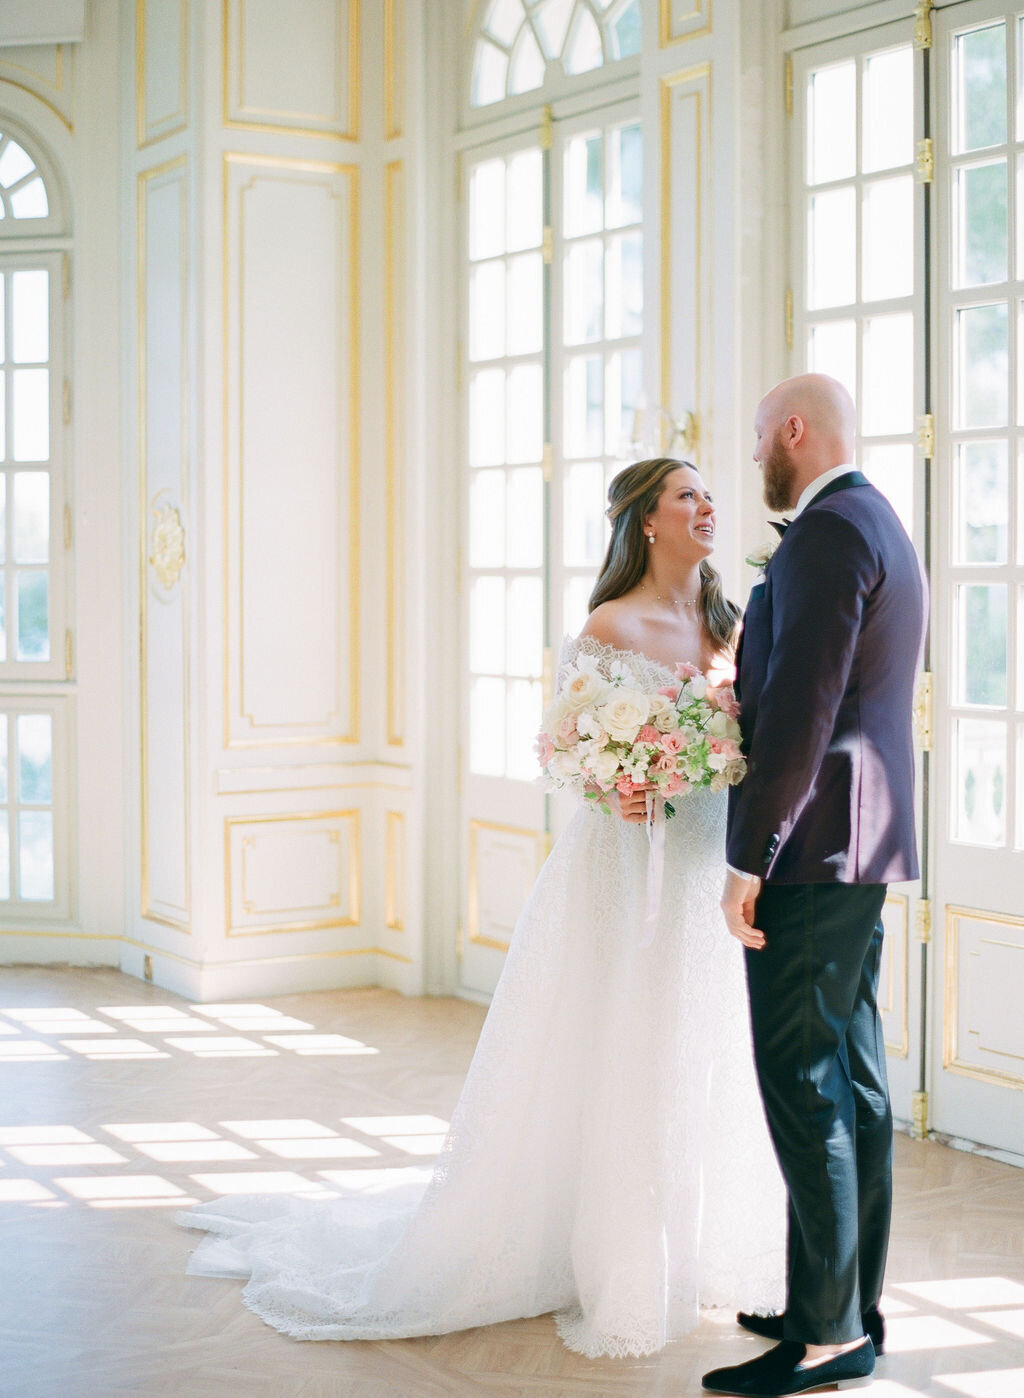 Jennifer Fox Weddings English speaking wedding planning & design agency in France crafting refined and bespoke weddings and celebrations Provence, Paris and destination Alyssa-Aaron-Wedding-Molly-Carr-Photography-First-Look-10